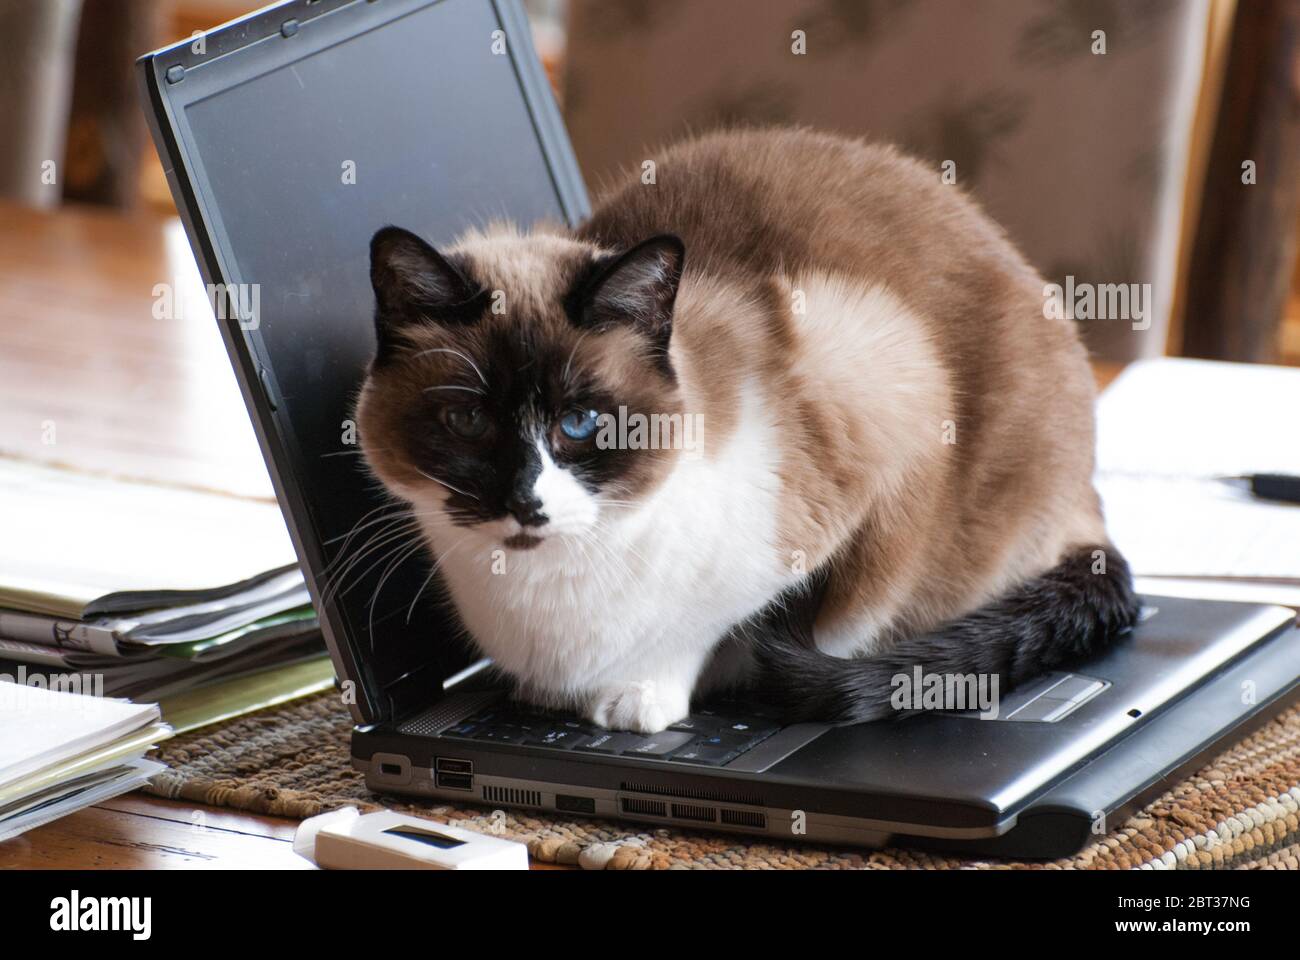 Working from home computer laptop with cute blue-eyed cat resting on the keyboard. Stock Photo